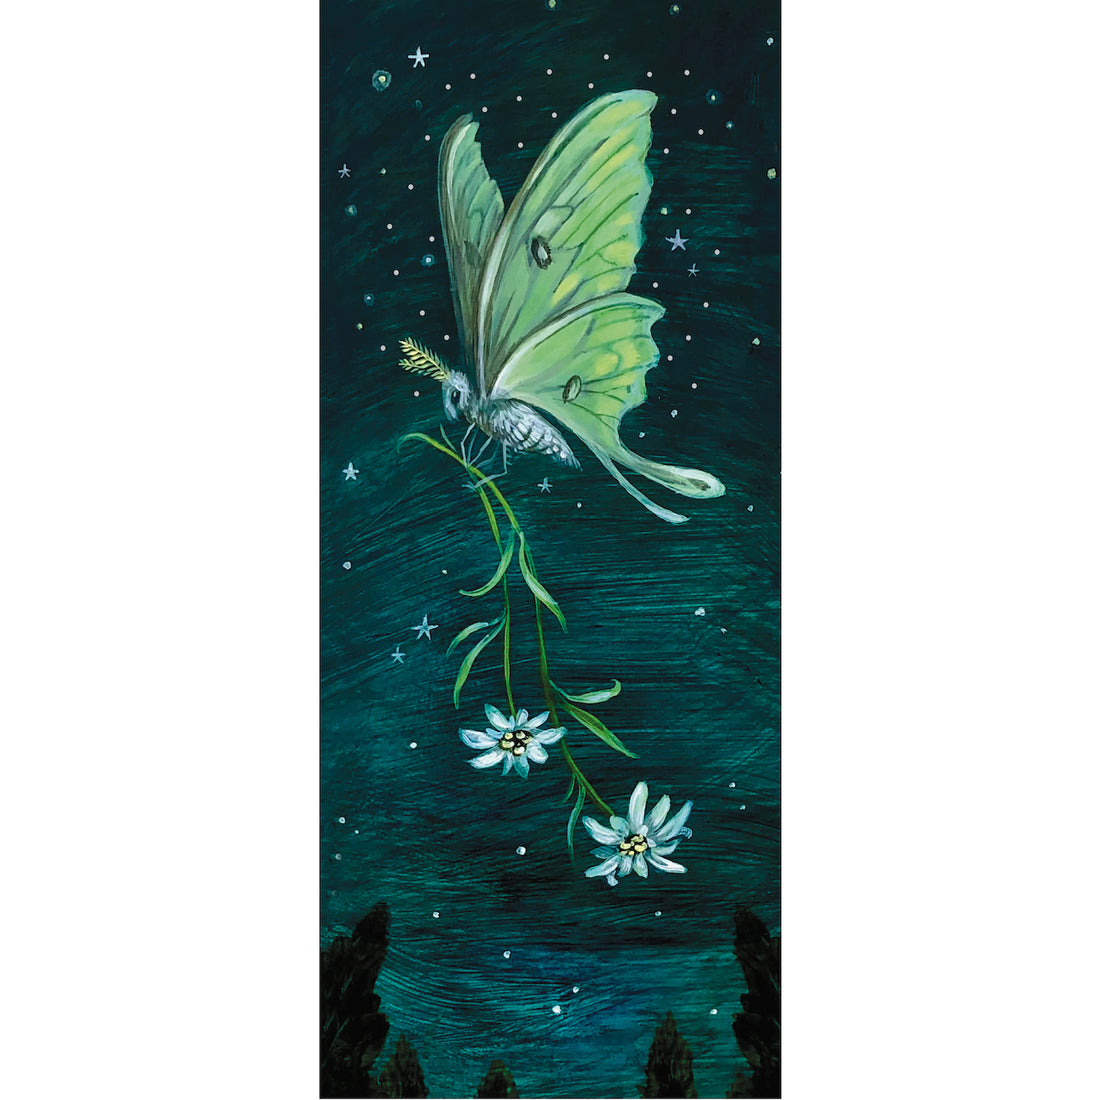 A whimsical illustration of a lime green moth with bushy antennas, flying through the starry night sky carrying two white blooms by the stems.